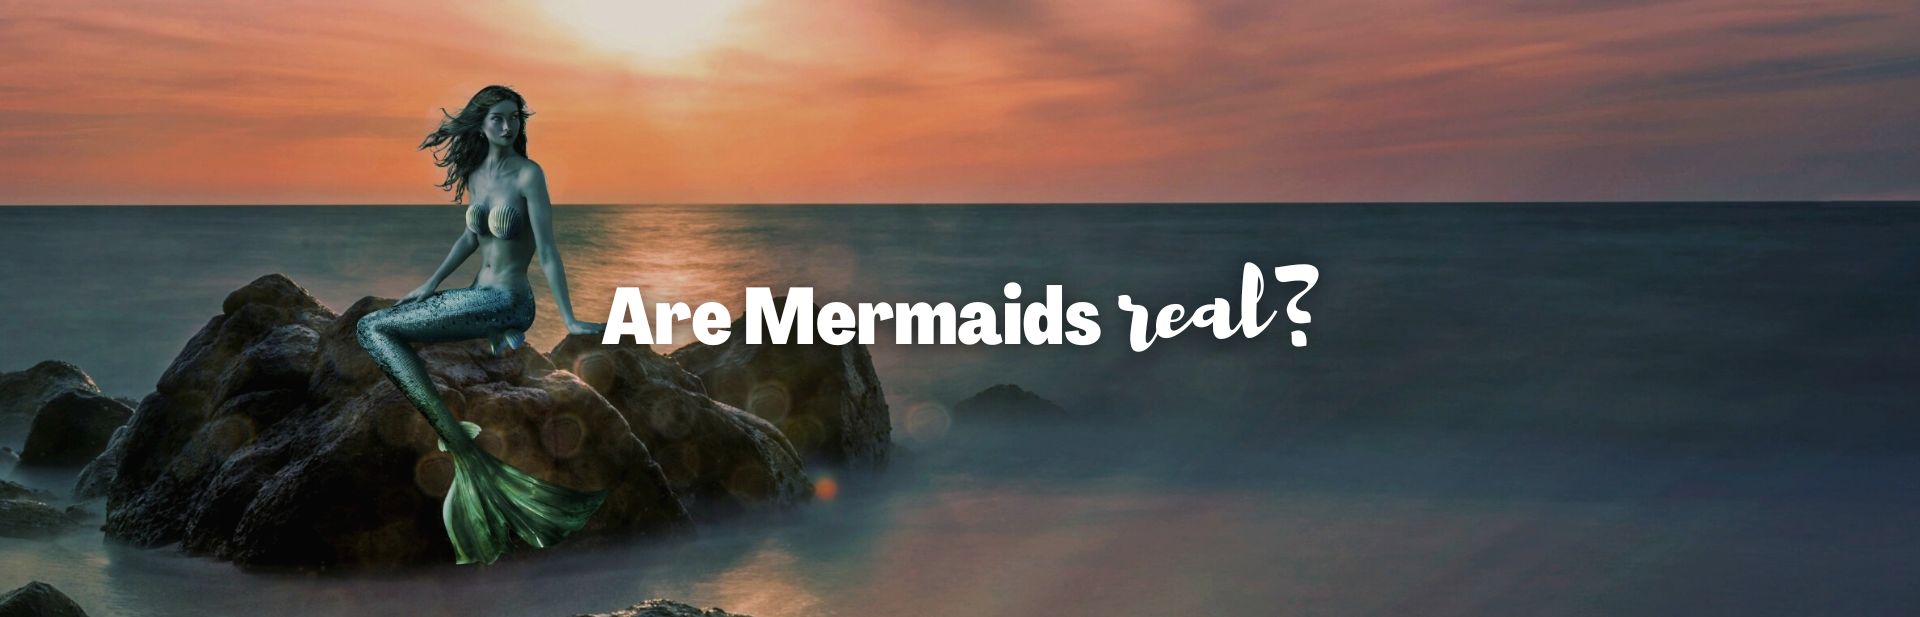 Are Mermaids Real? The Truth Behind The Mermaid Myth